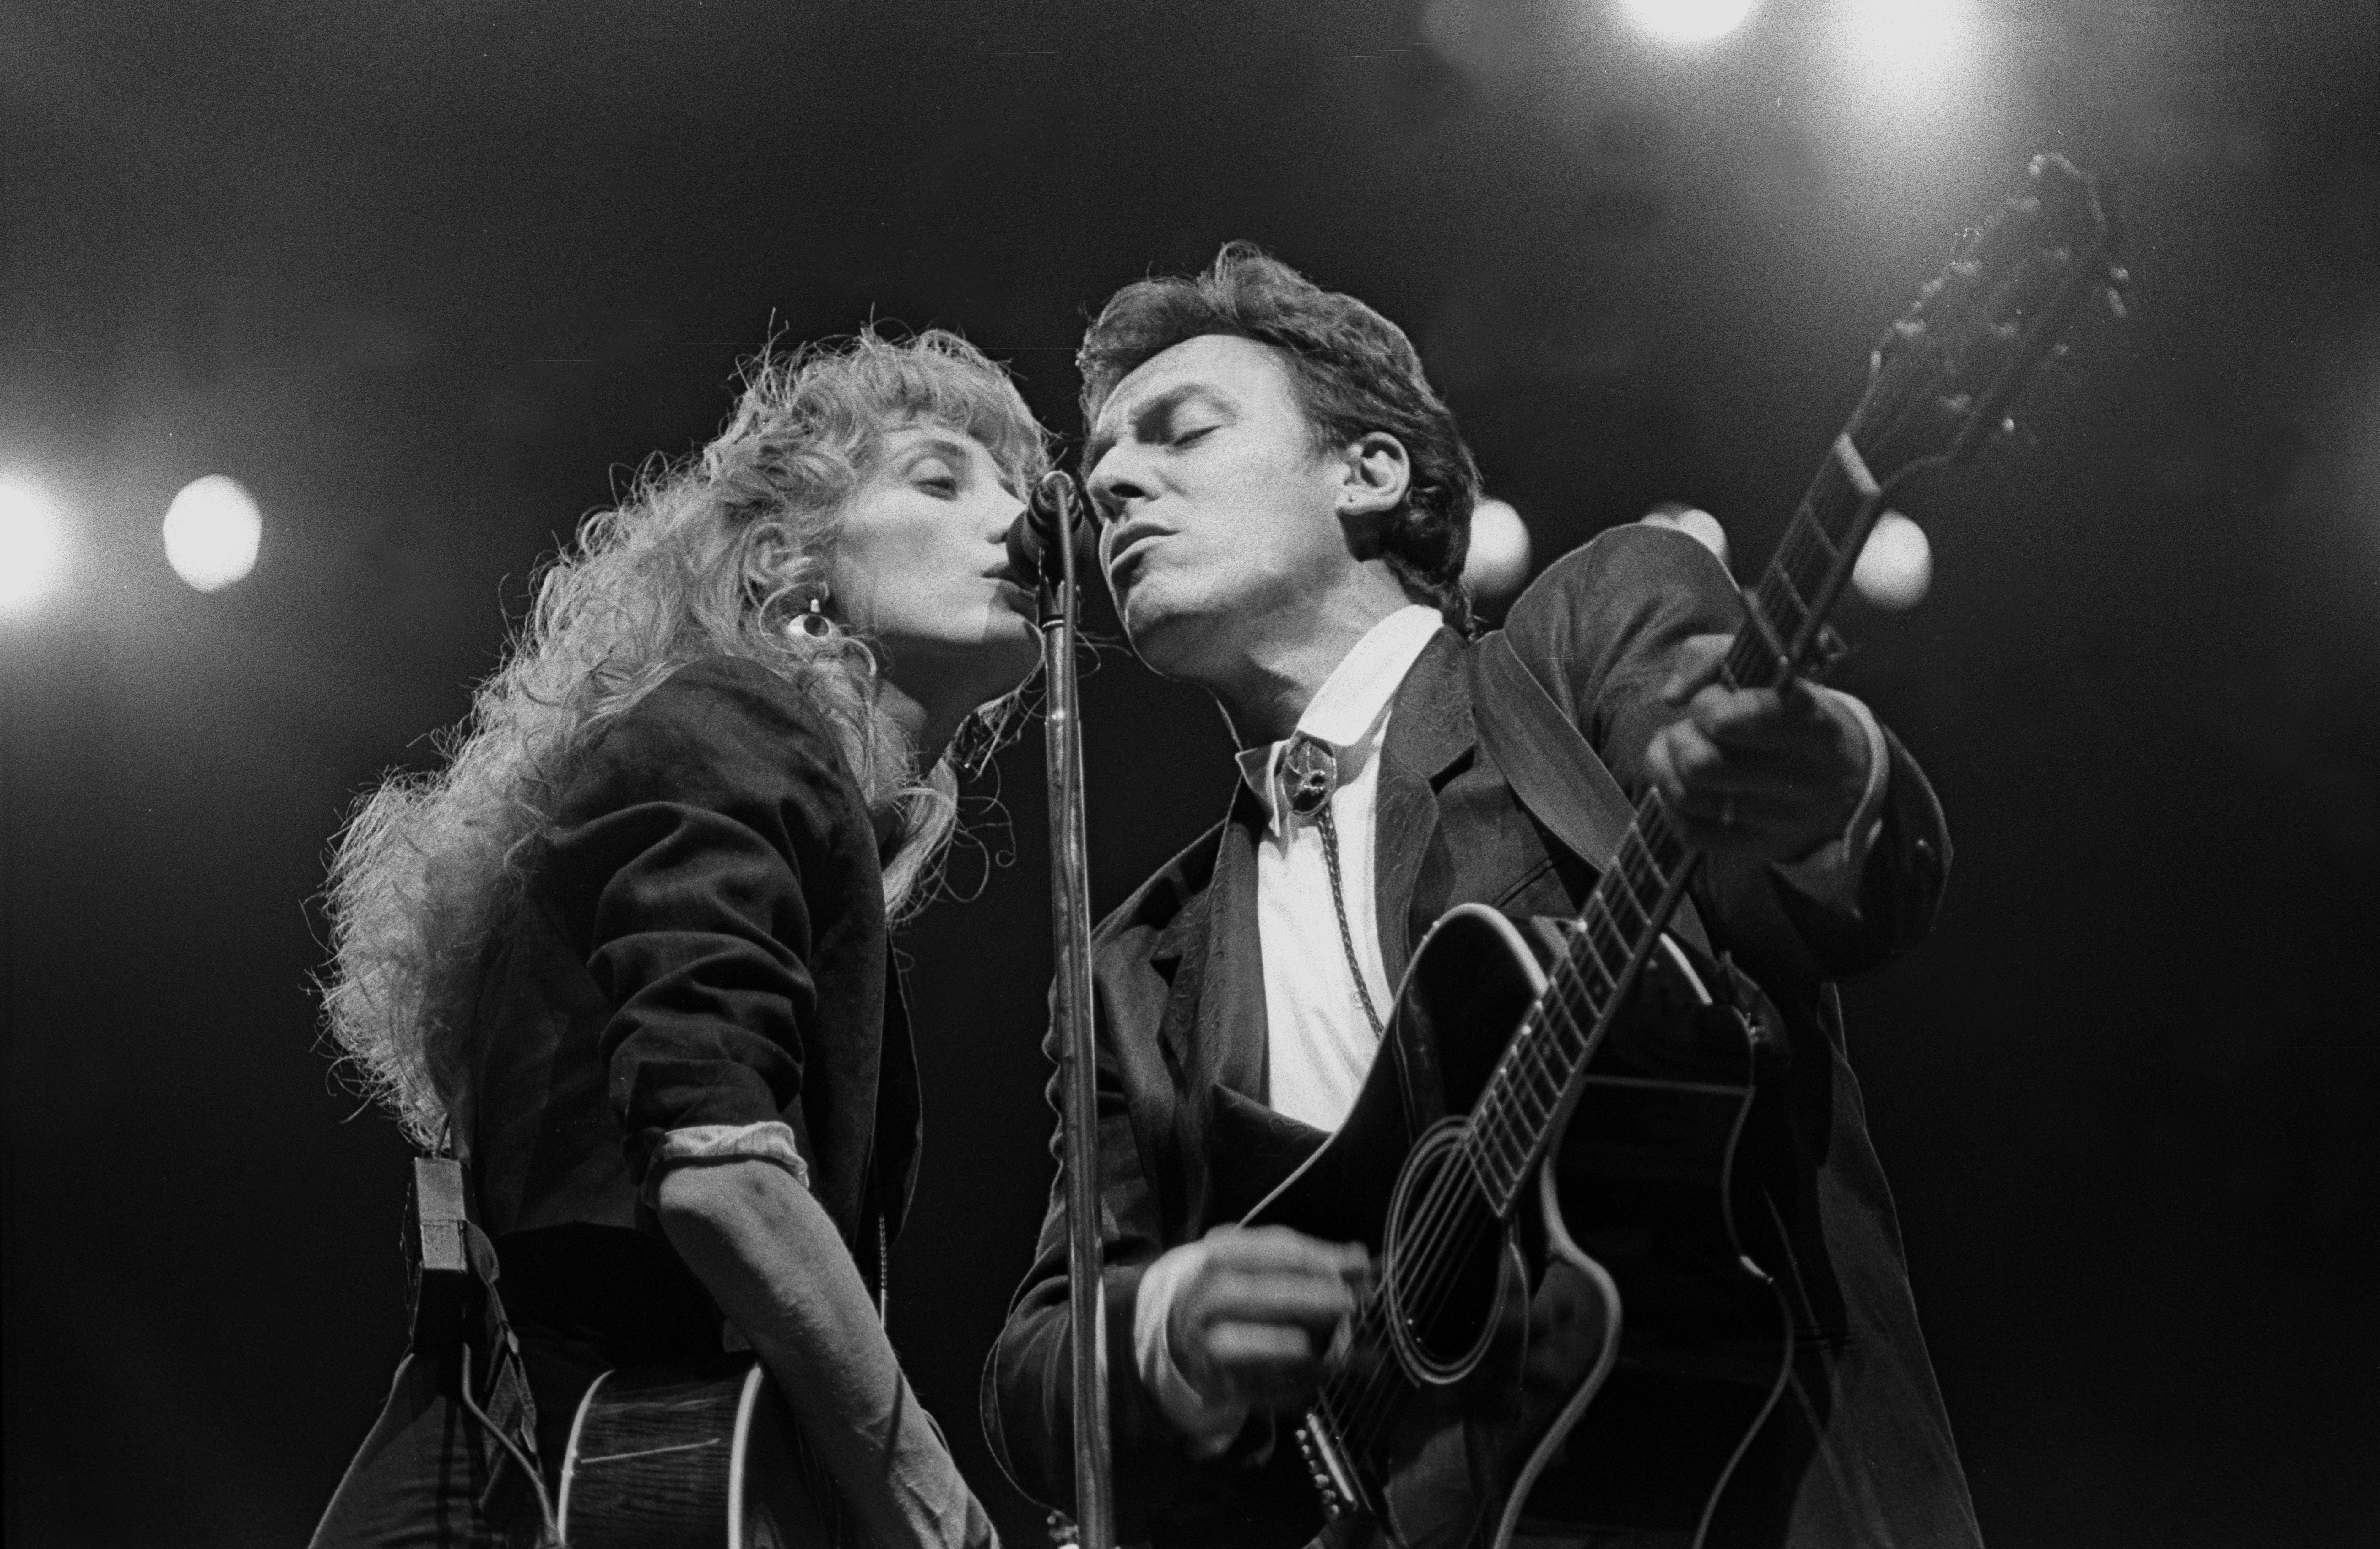 Patti Scialfa and Bruce Springsteen performing during a live concert on February 28, 1988 | Source: Getty Images